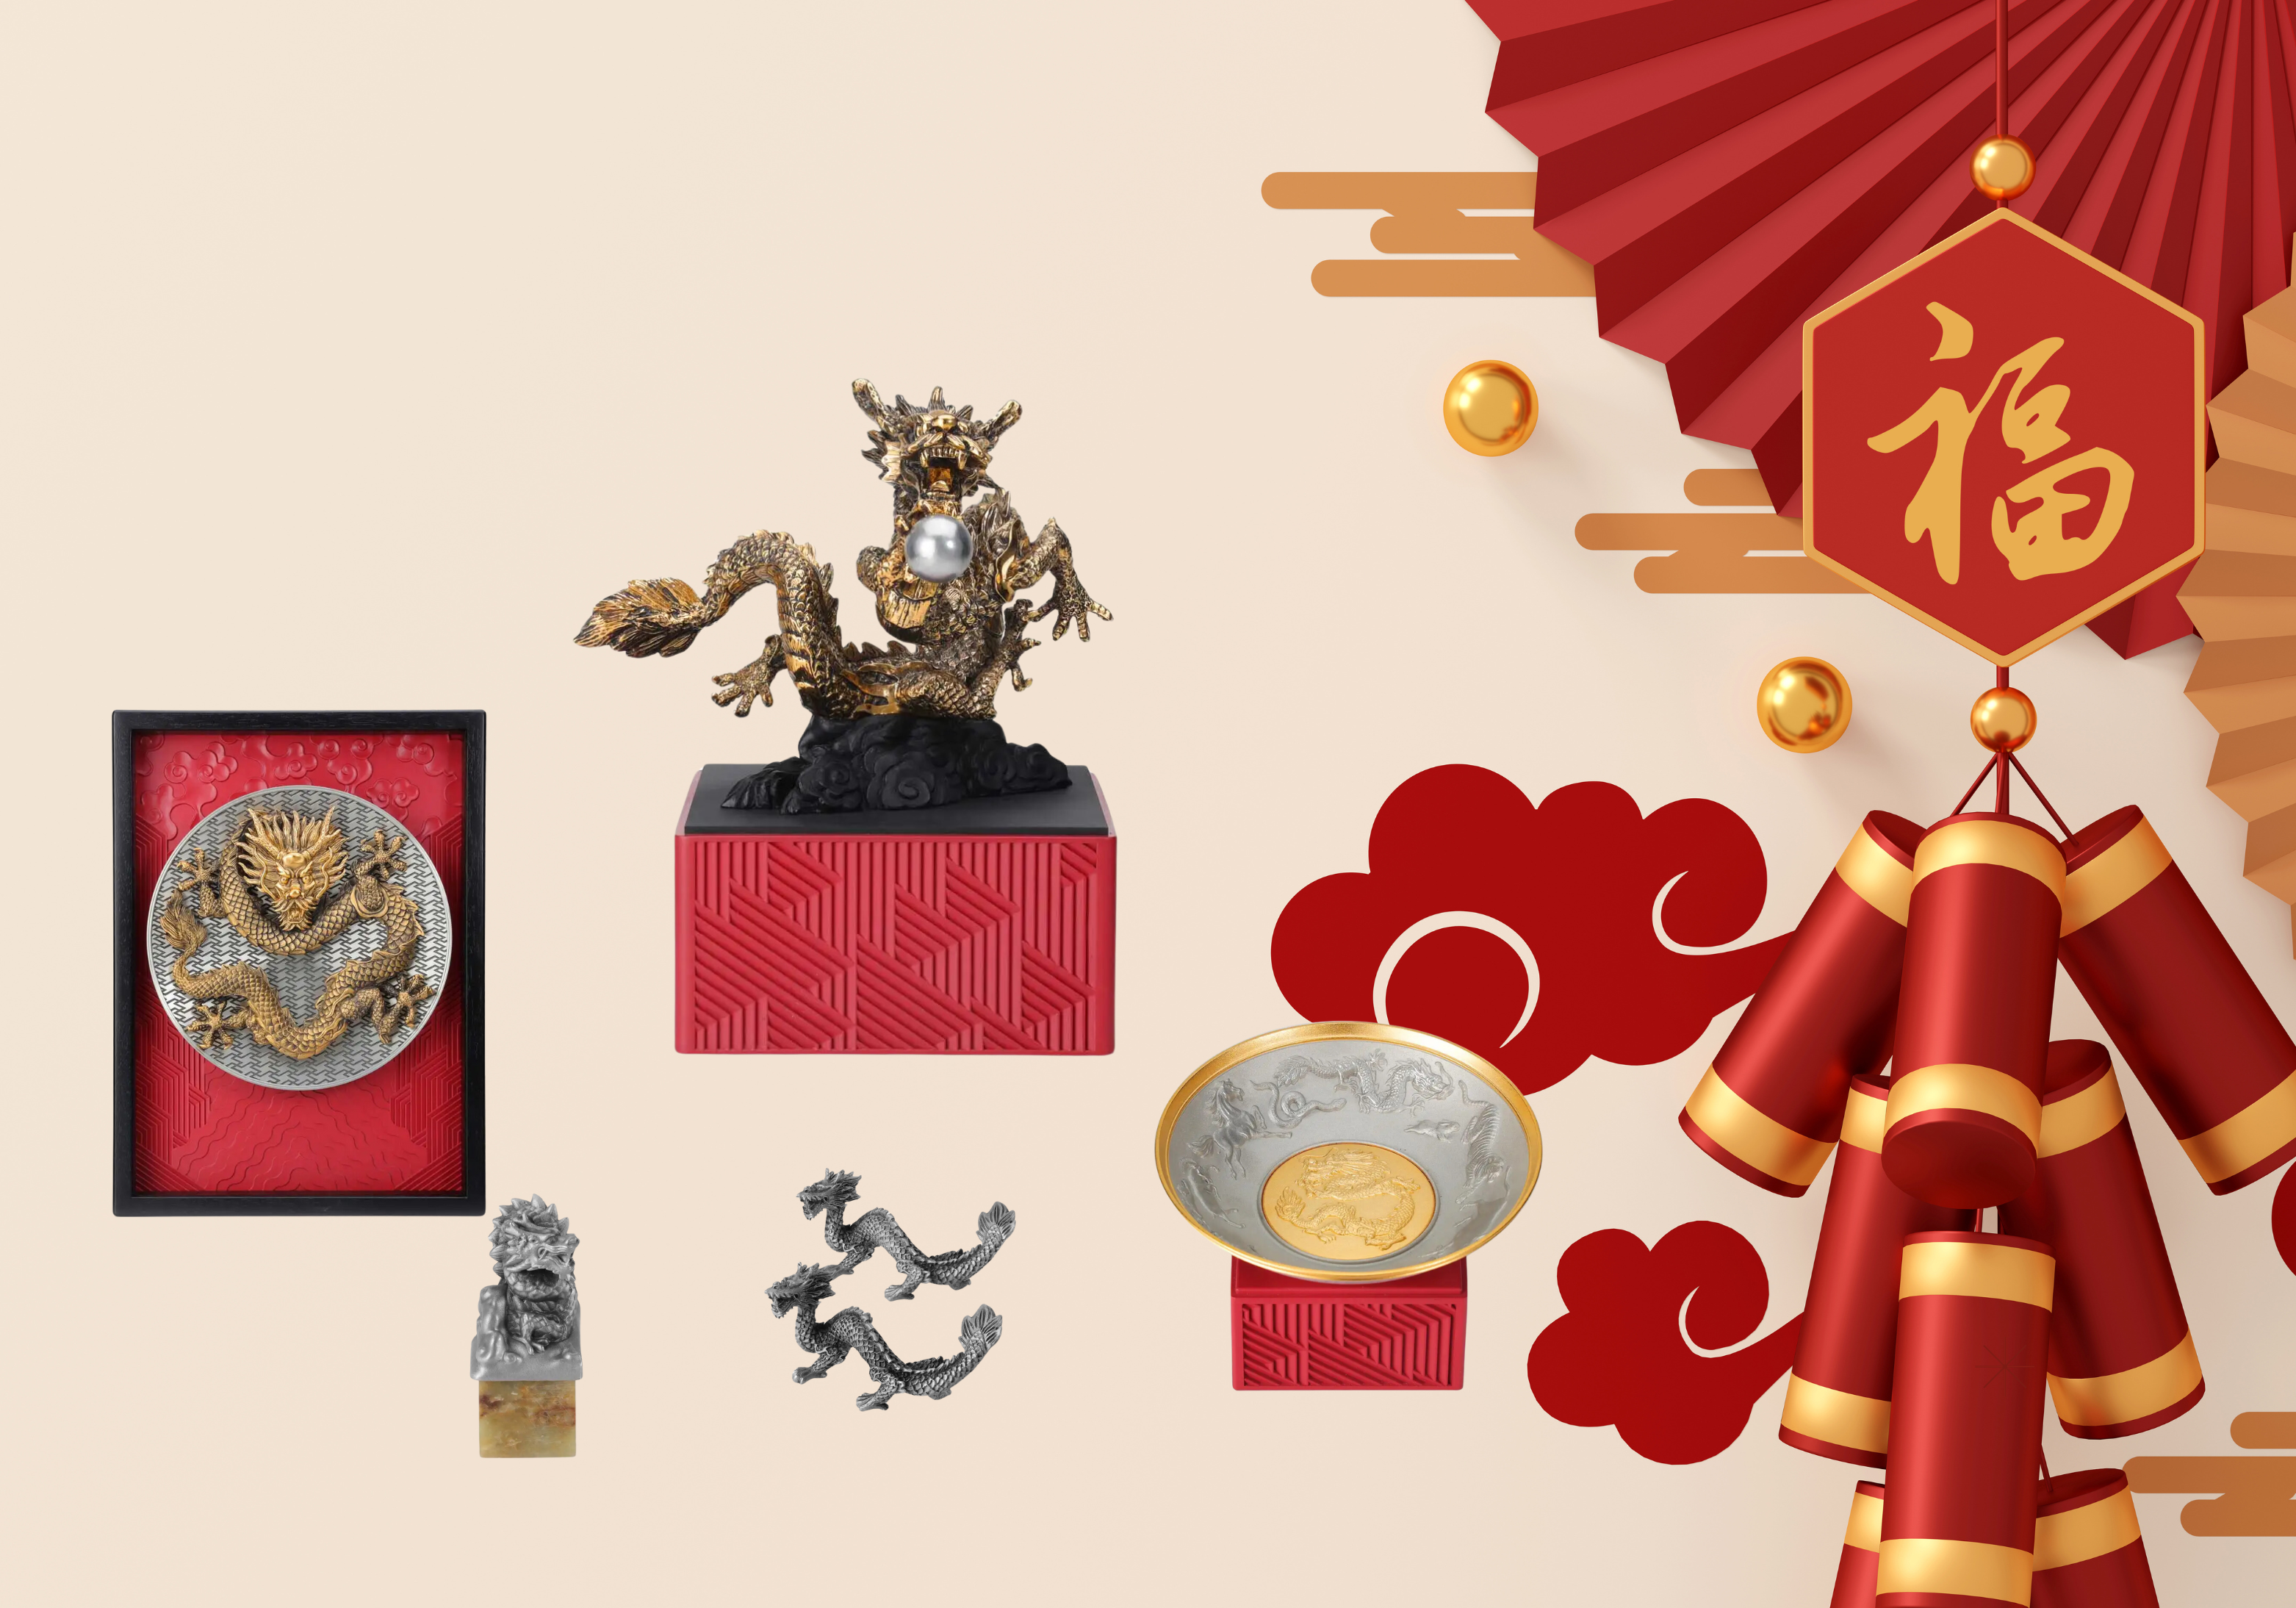 The Year of Dragon